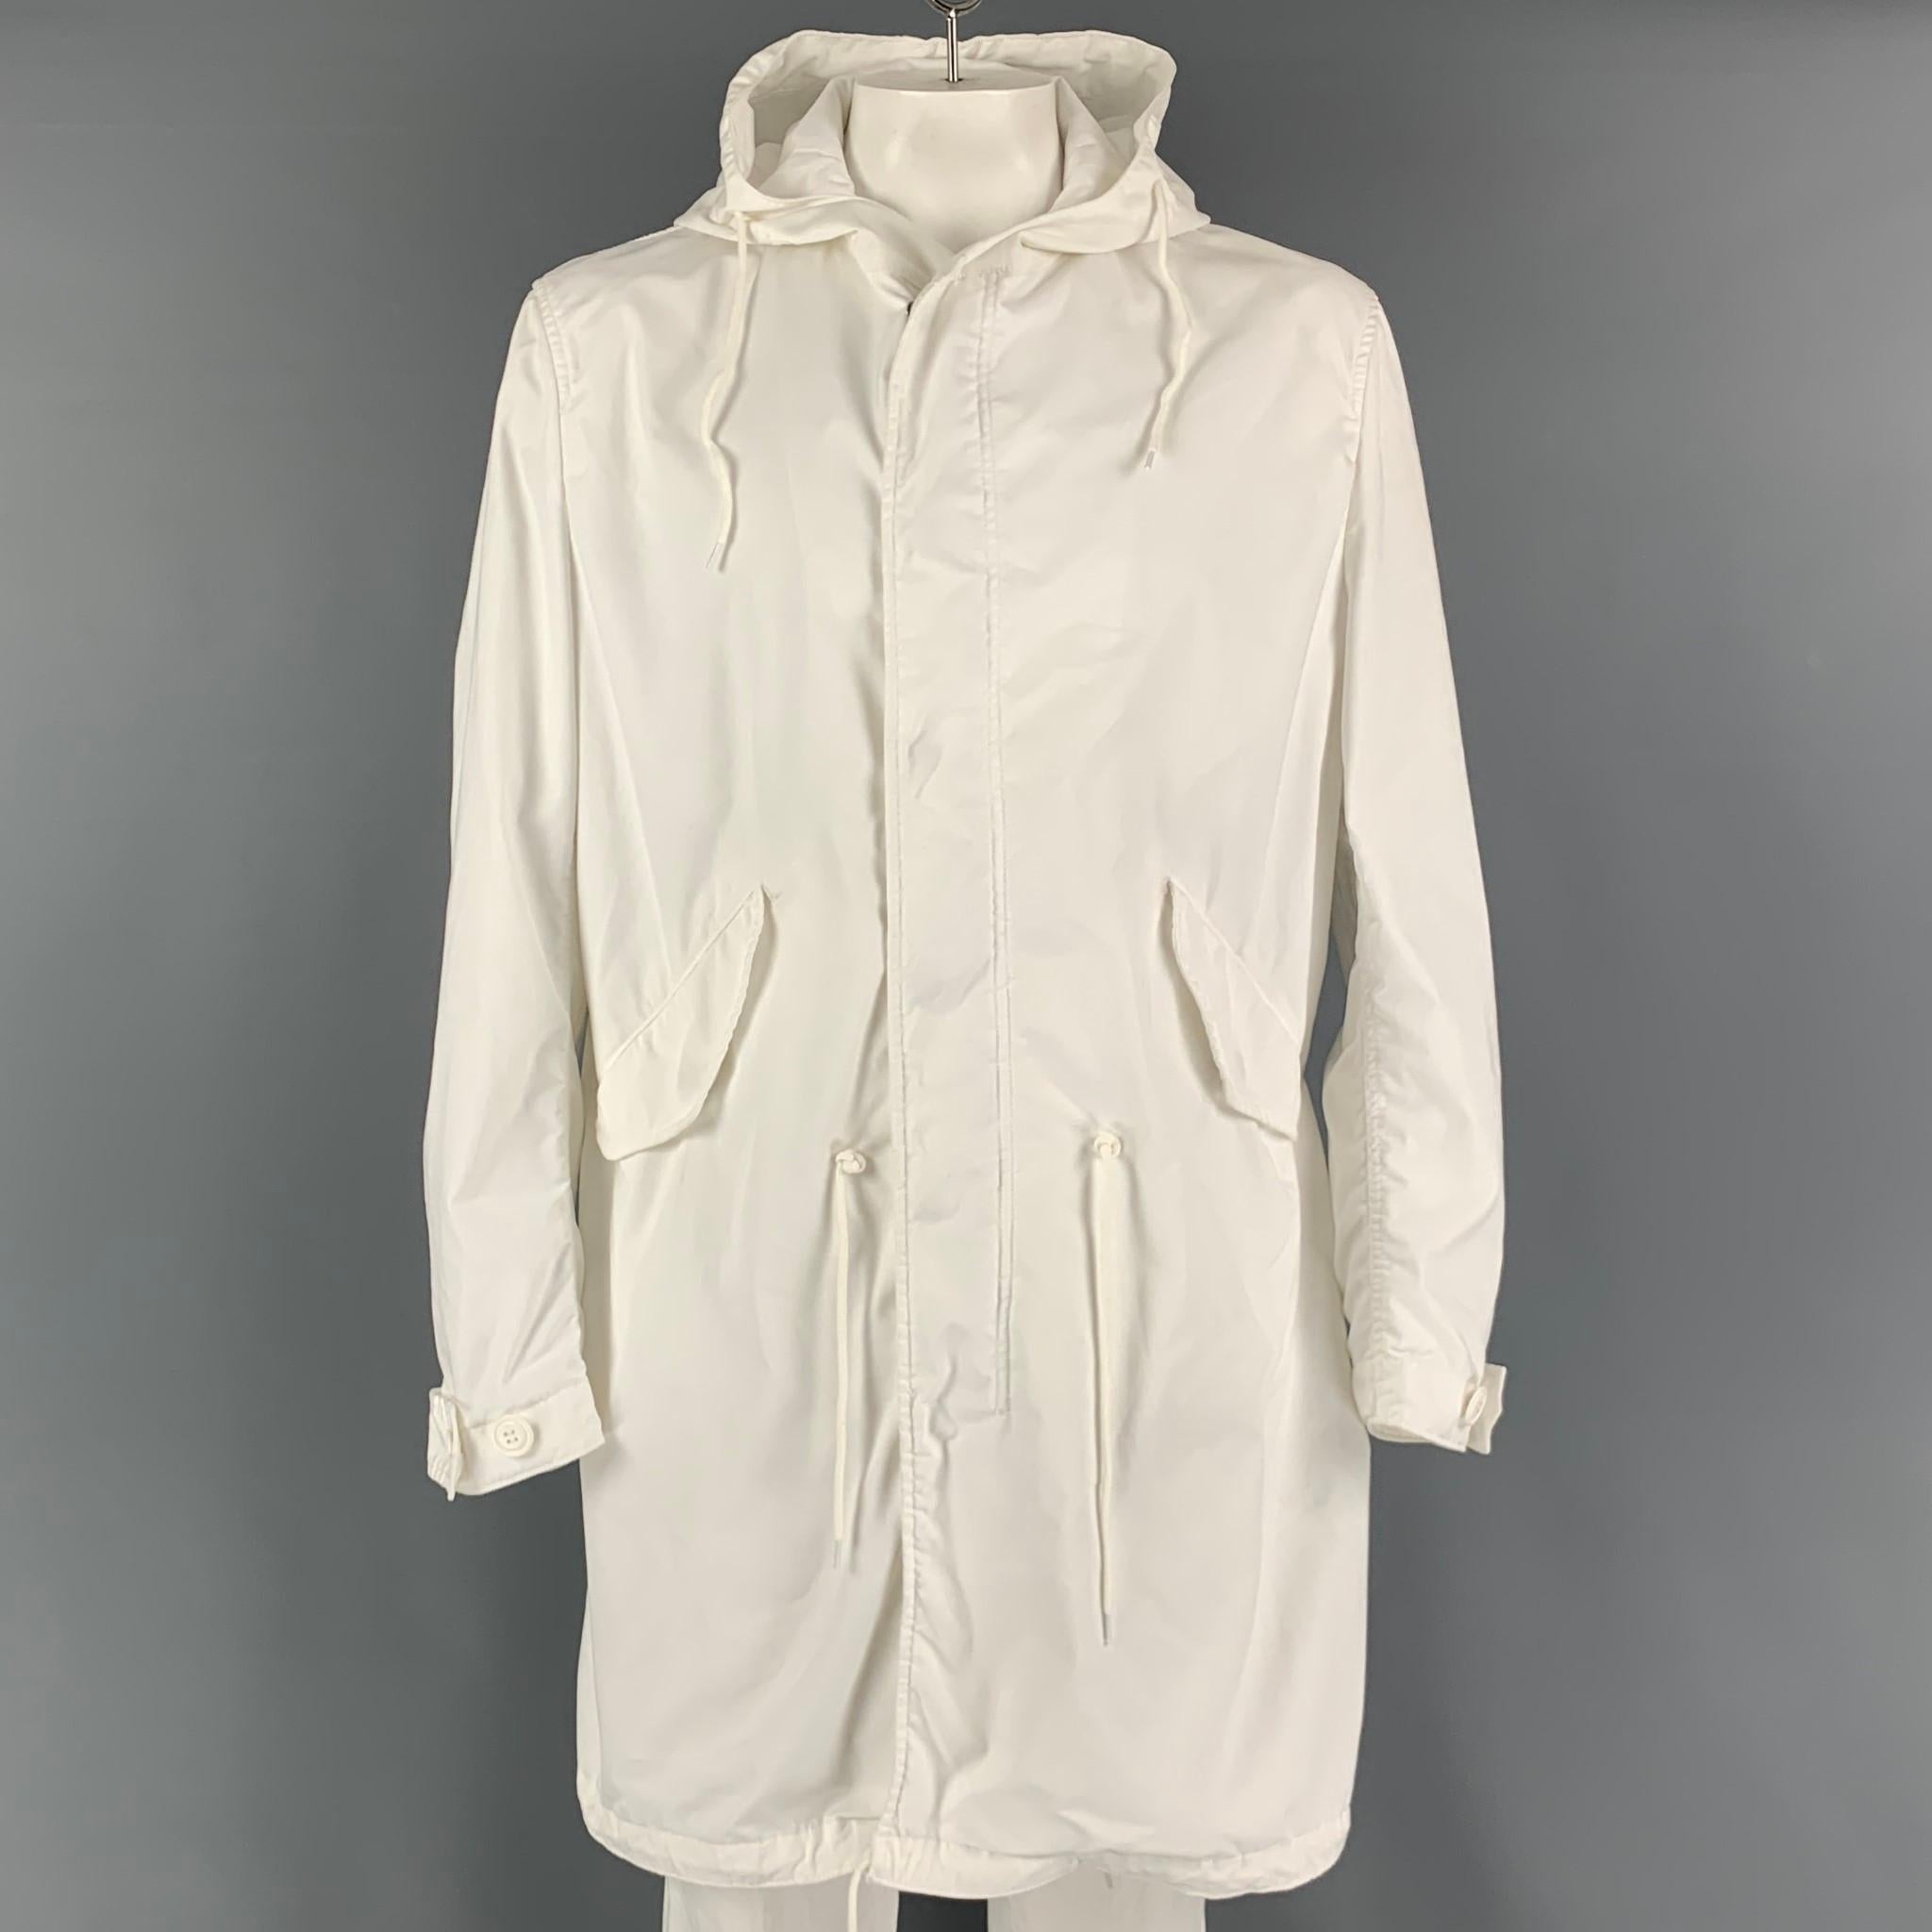 COMME des GARCONS HOMME AD2018 long coat comes in a white polyester material featuring a parka hooded style, large flap pockets, oversized fit, drawstring details, and a hidden zip & snap button closure. Made in Japan.

Very Good Pre-Owned